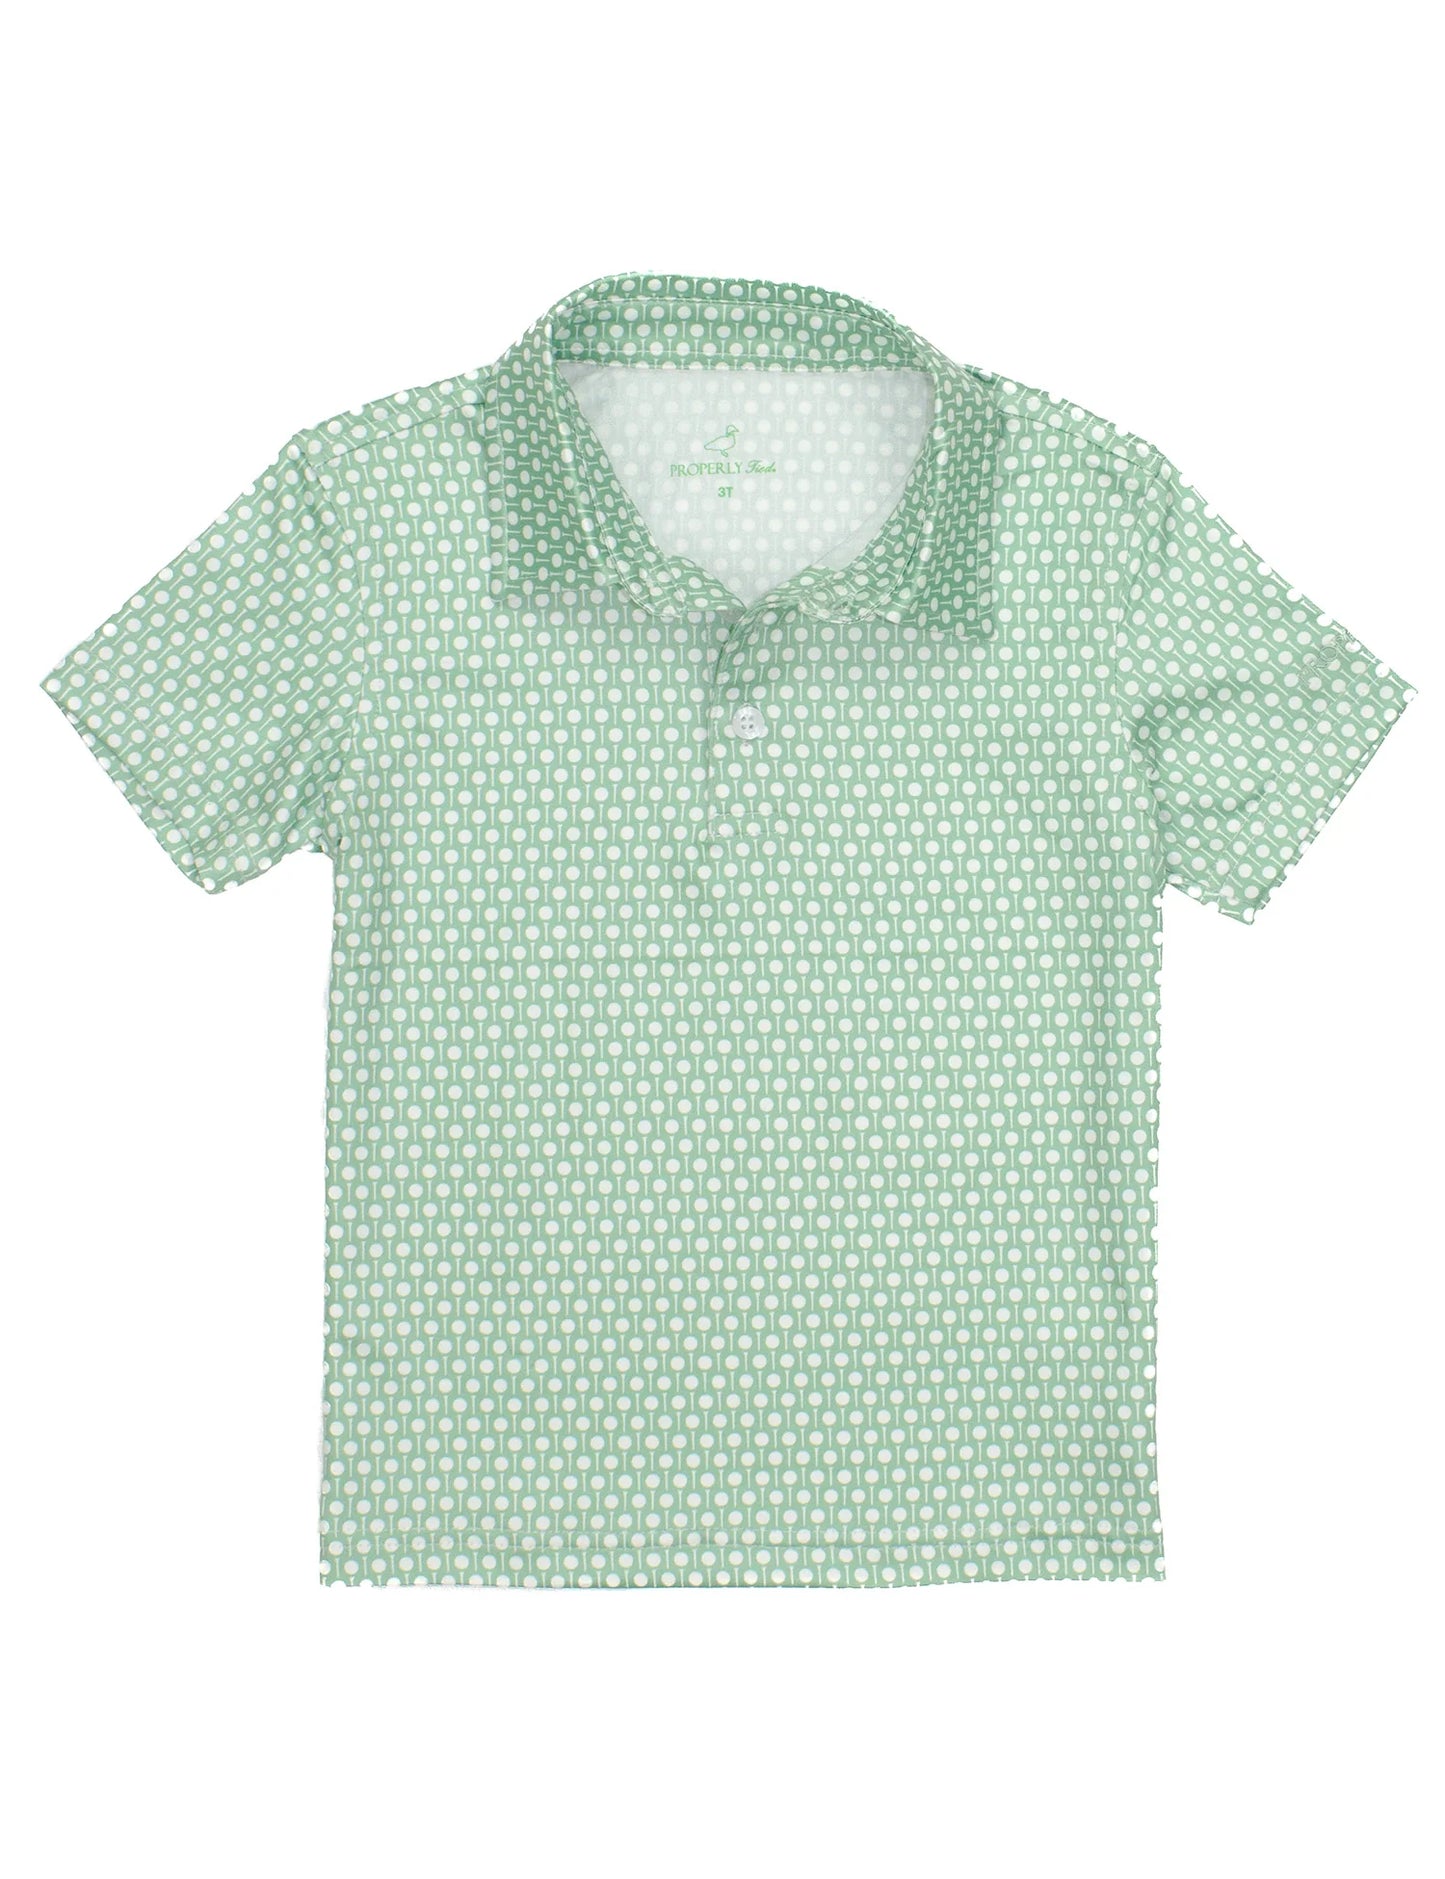 Inlet Tee Time Polo